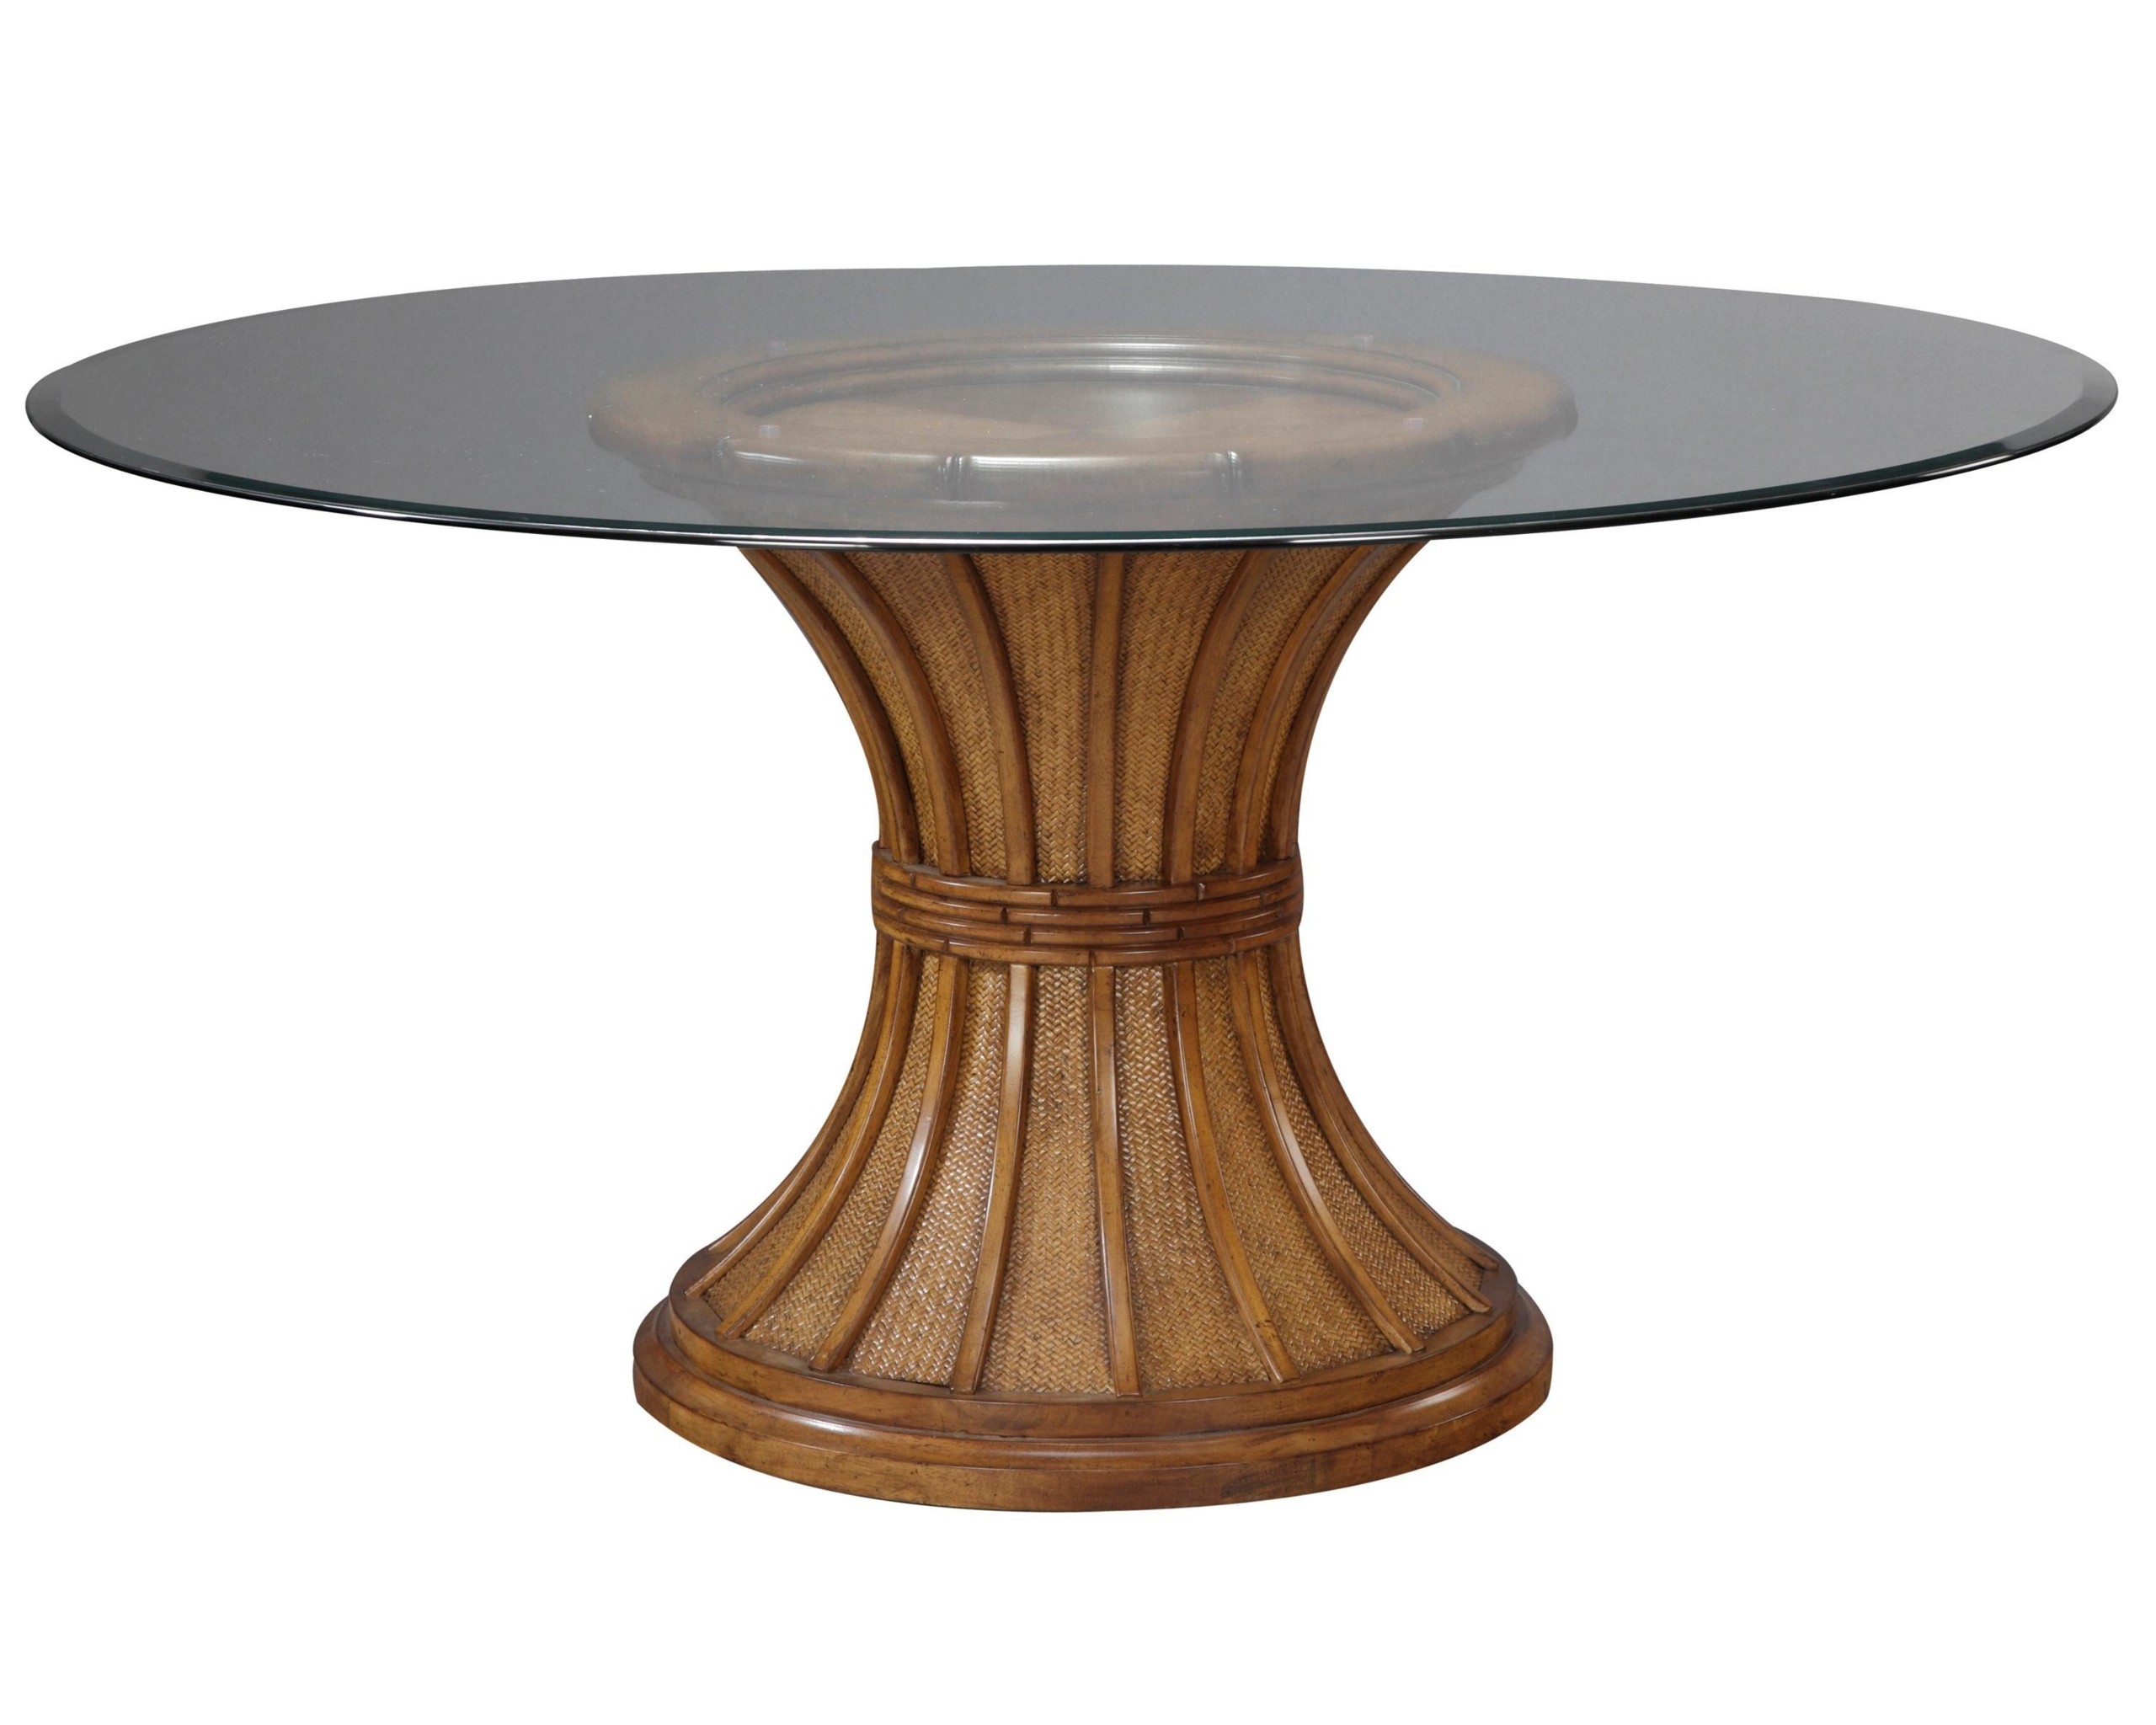 Beautiful pedestal table base for glass top homesfeed 9